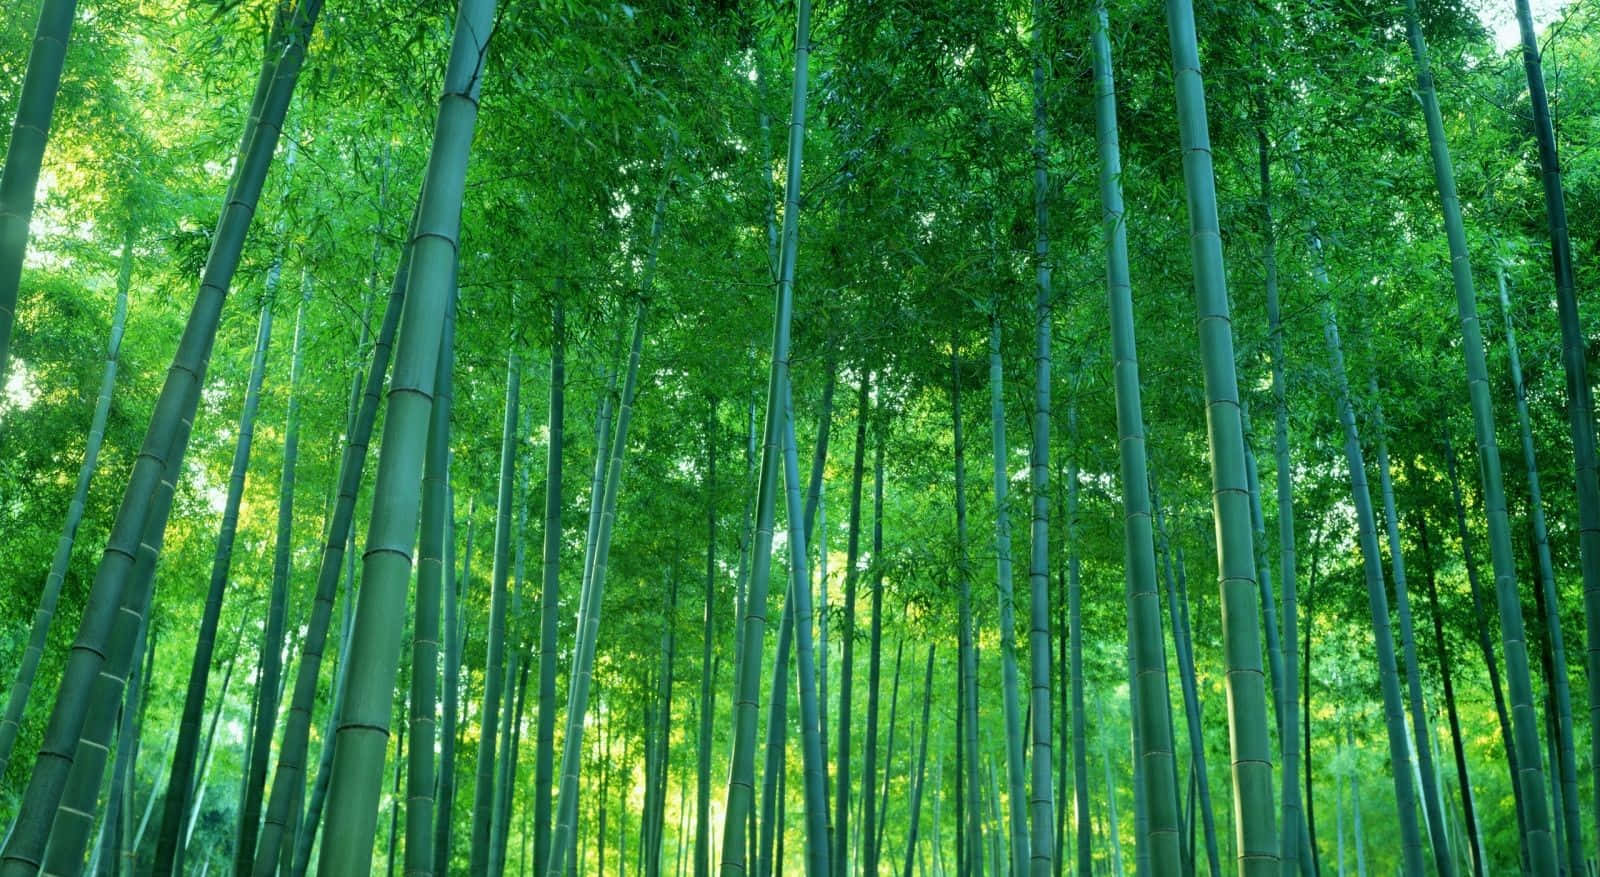 A Stand of Bamboo Trees Speckle an Exotic Green Background